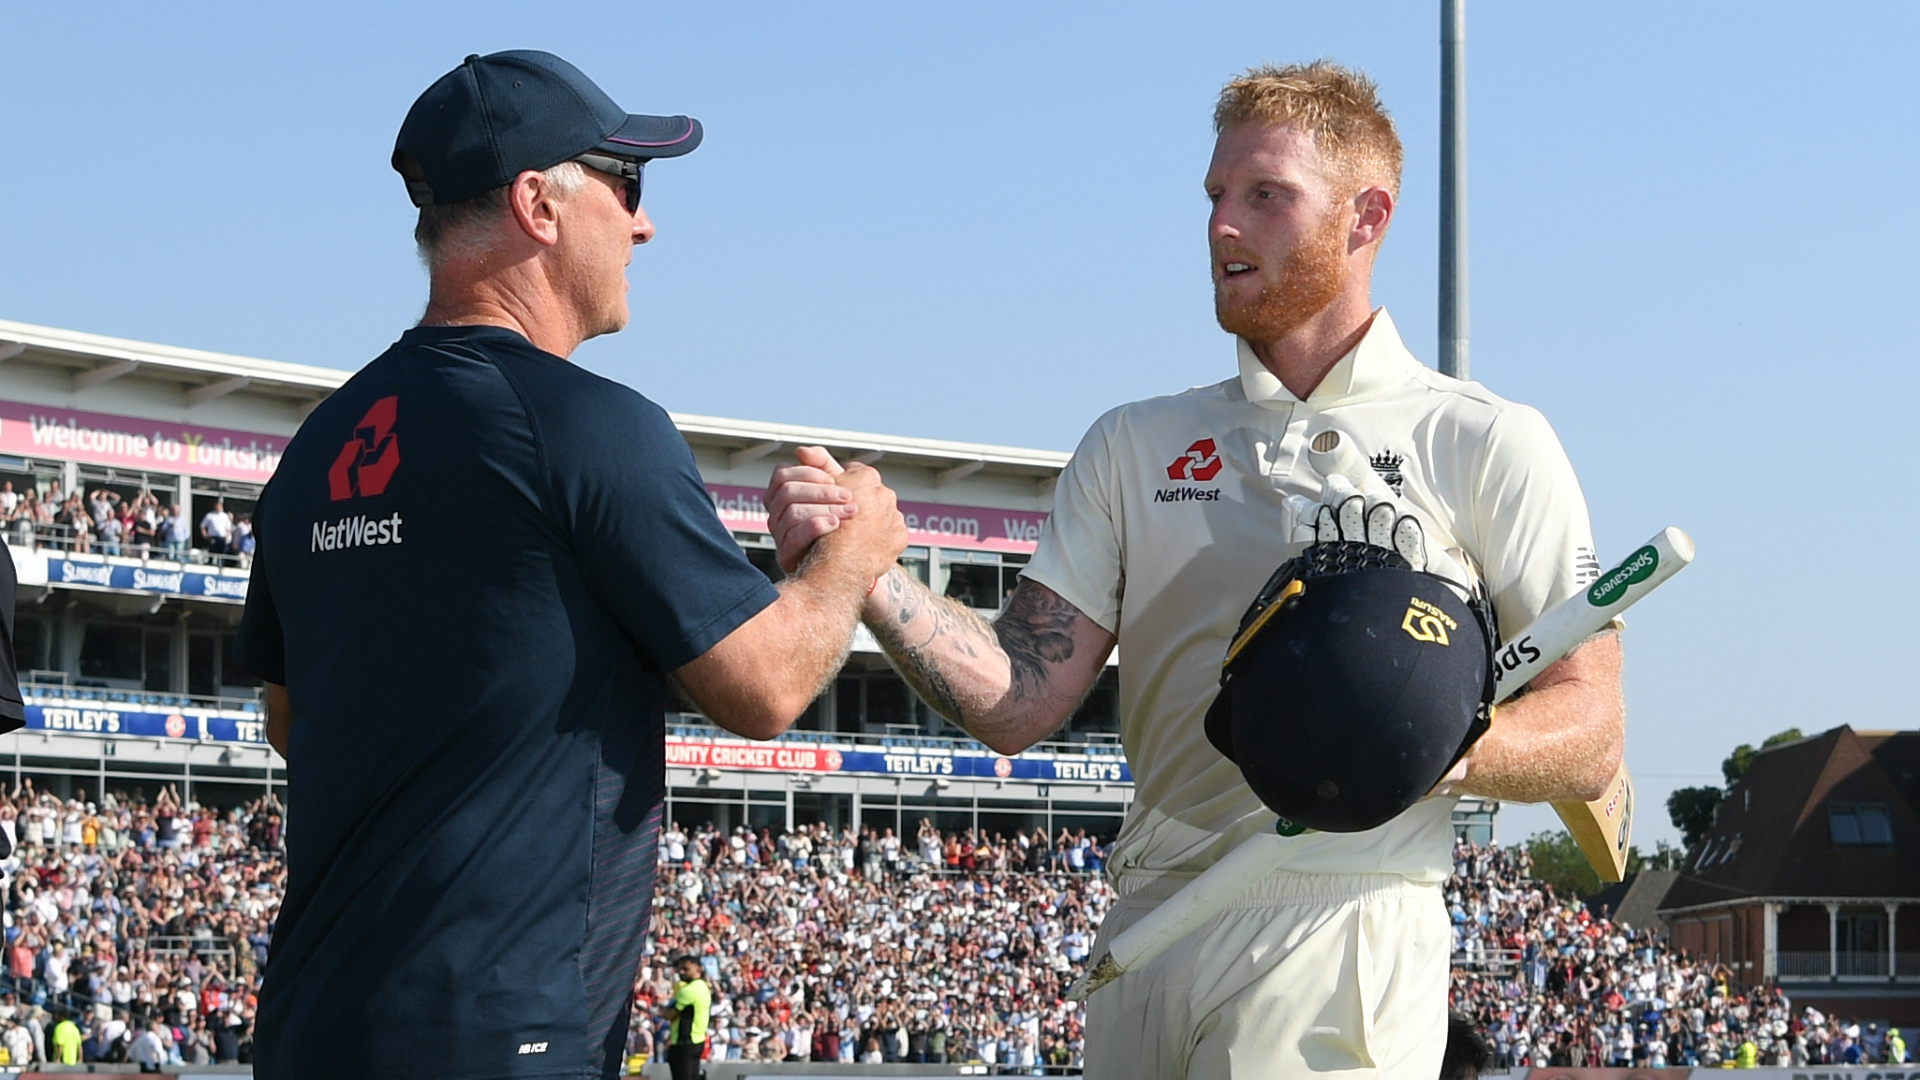 Ben Stokes drew praise from all quarters and social media was abuzz after the all-rounder helped England level the Ashes.